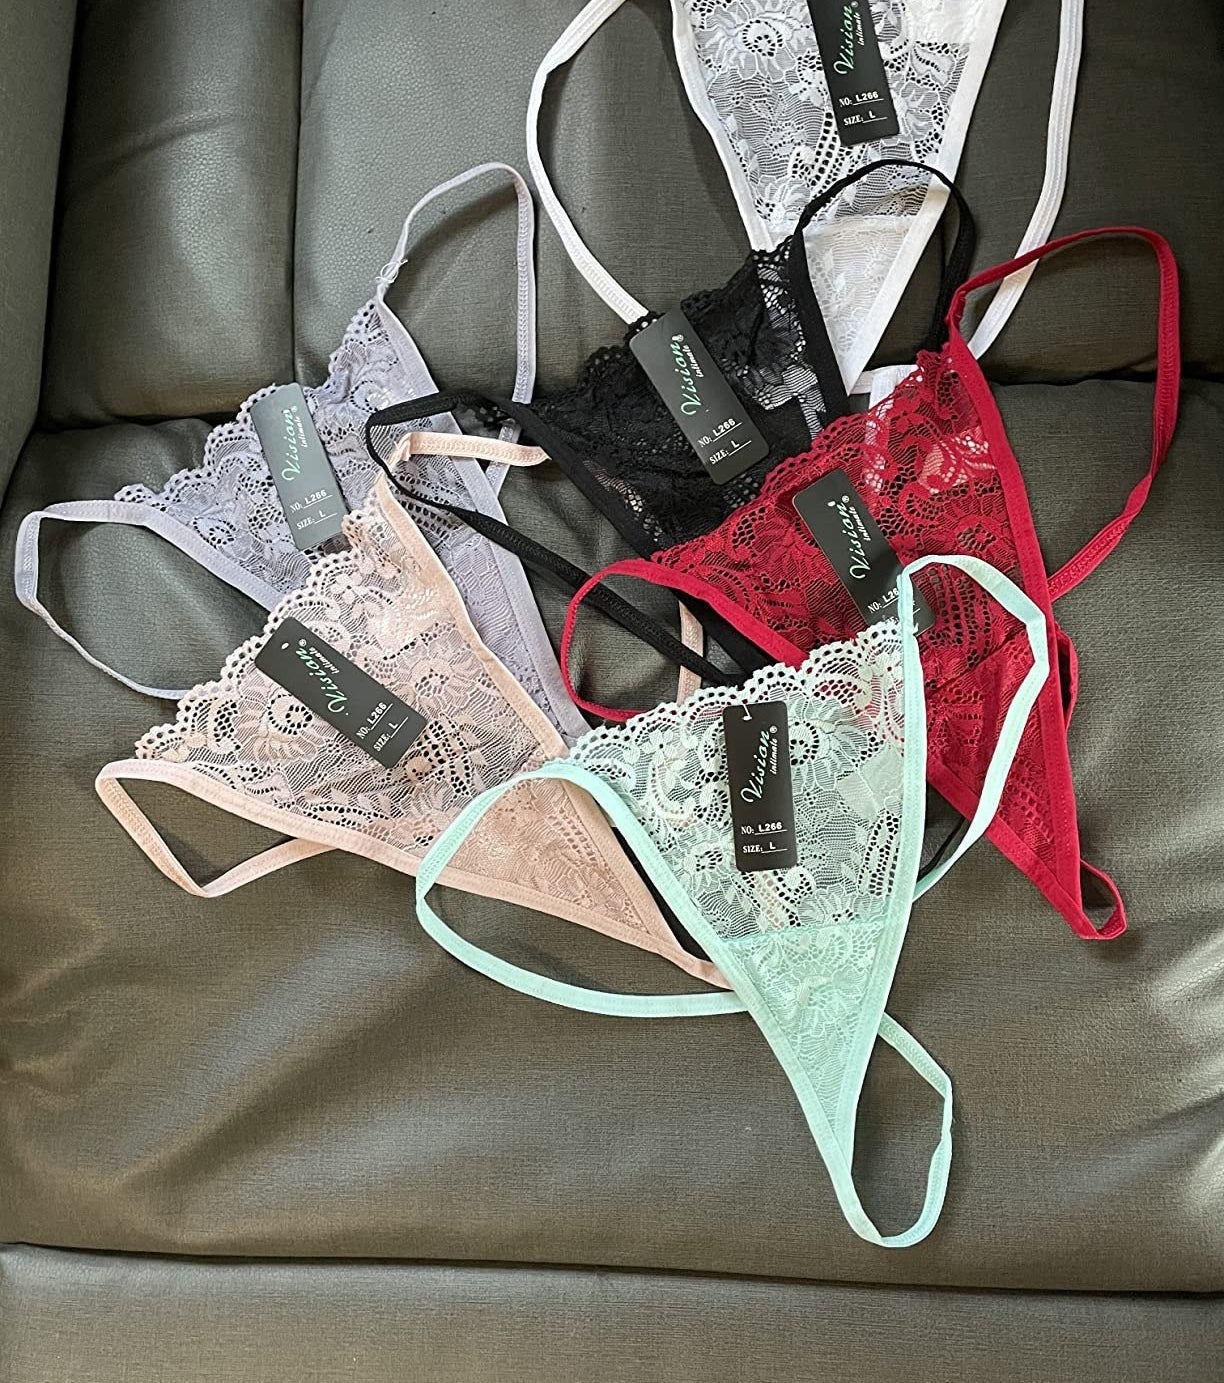 Knickers, 3 PACK Thongs, Lace Lingerie, G-string Panties. -  Canada